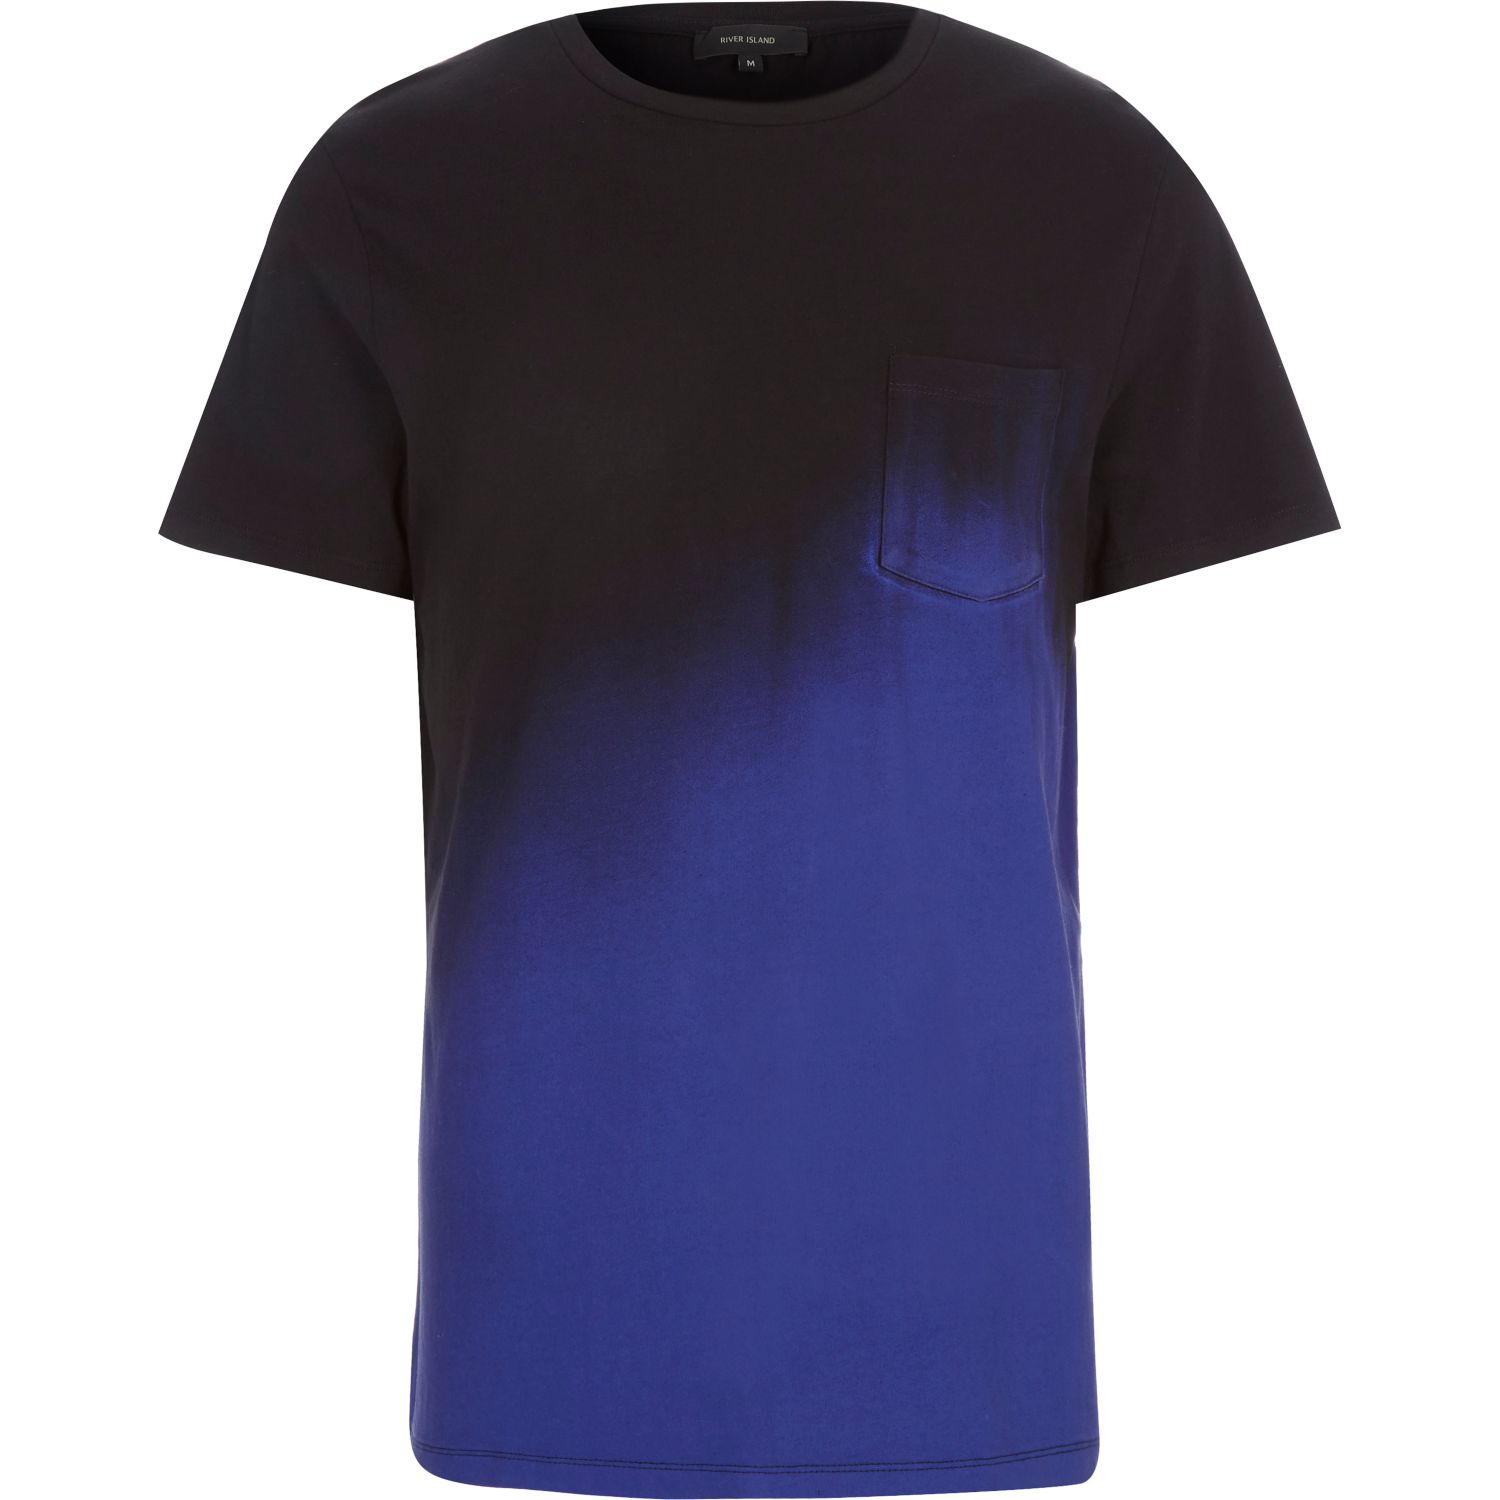 Lyst River Island Black And Blue Fade Pocket T Shirt In Black For Men